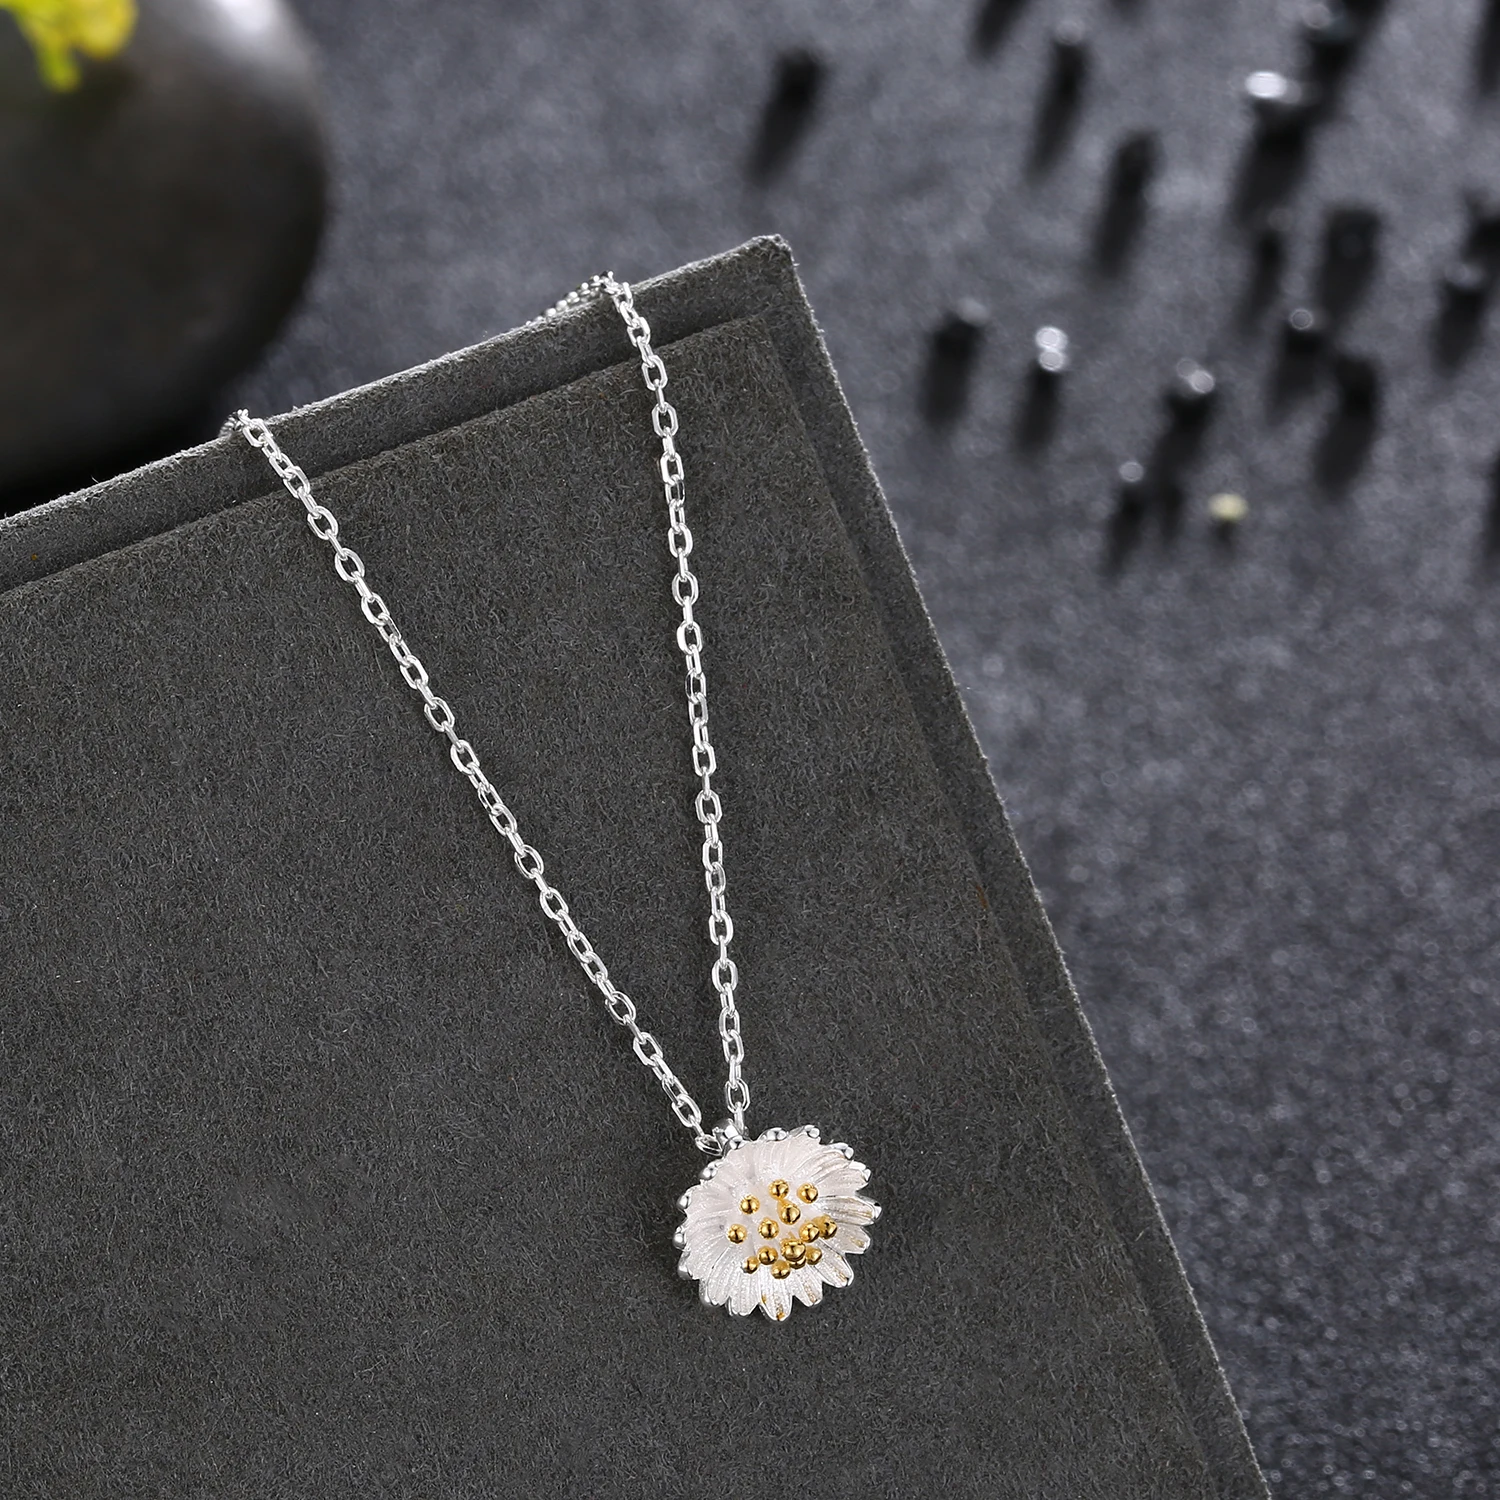 SILVERHOO Choker Necklaces For Women 925 Sterling Silver Trendy Daisy Long Chain Pendant Necklaces Female Fine Party Jewelry